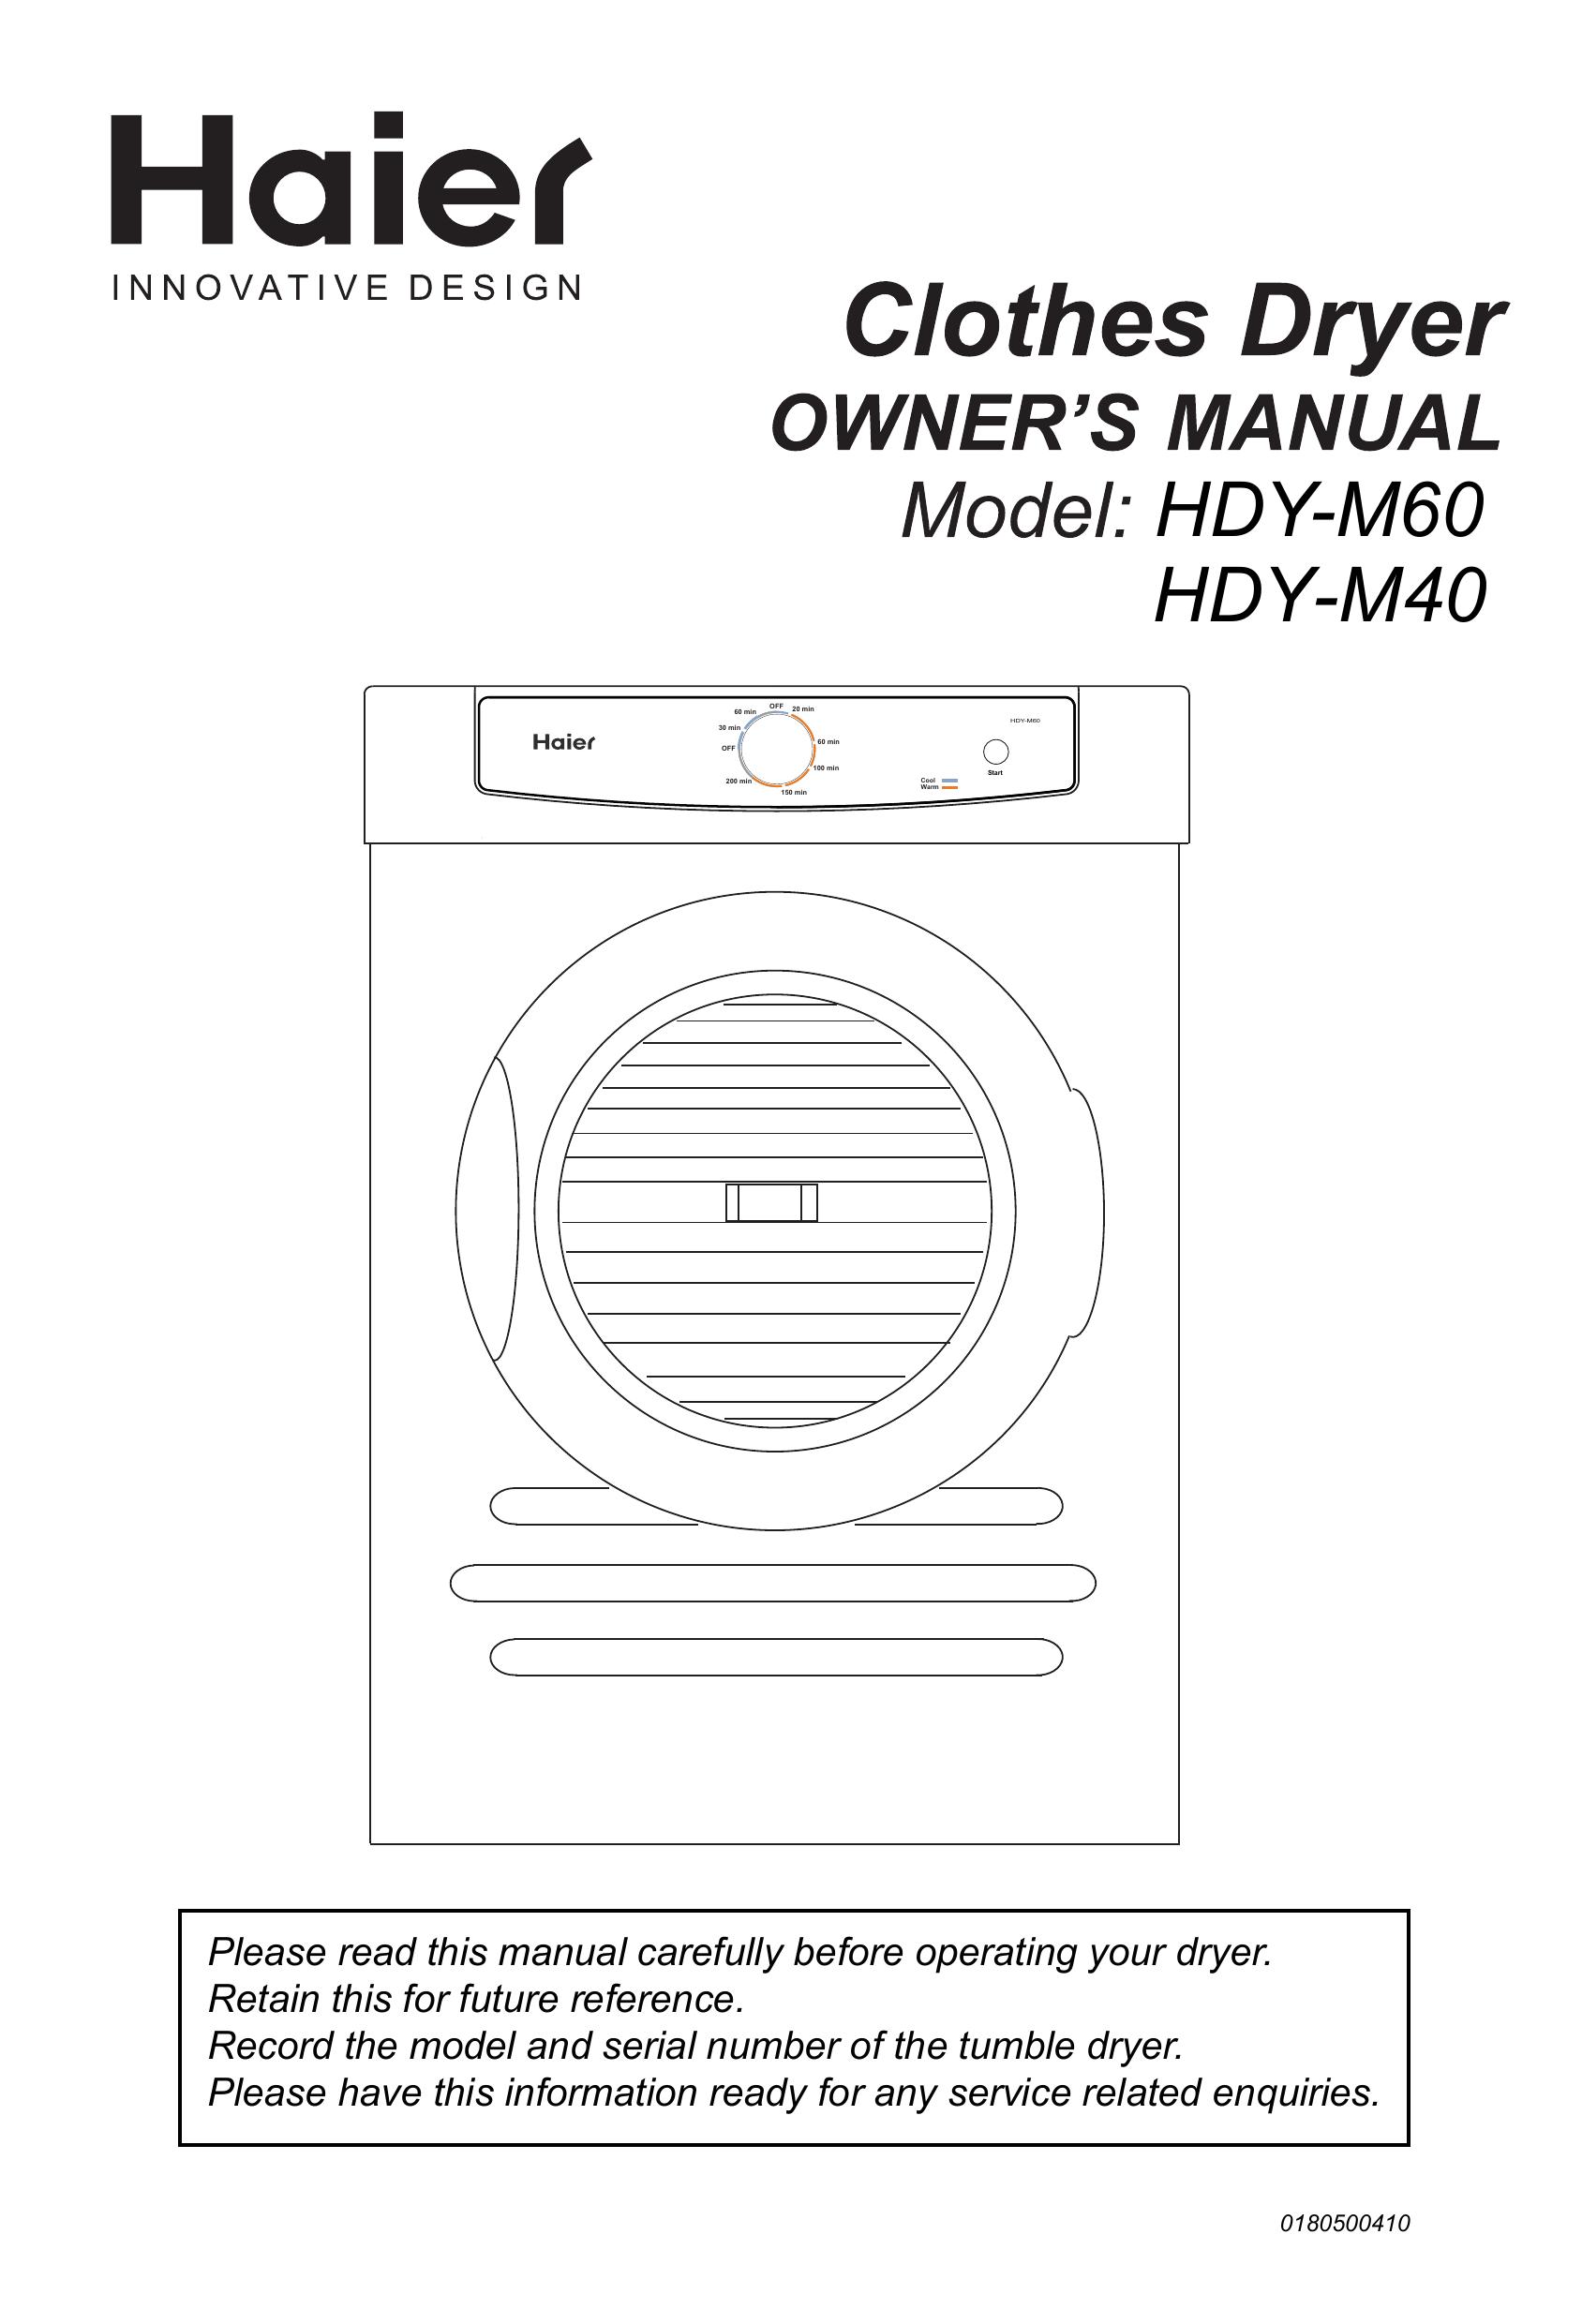 Haier HDY-M40 Clothes Dryer User Manual